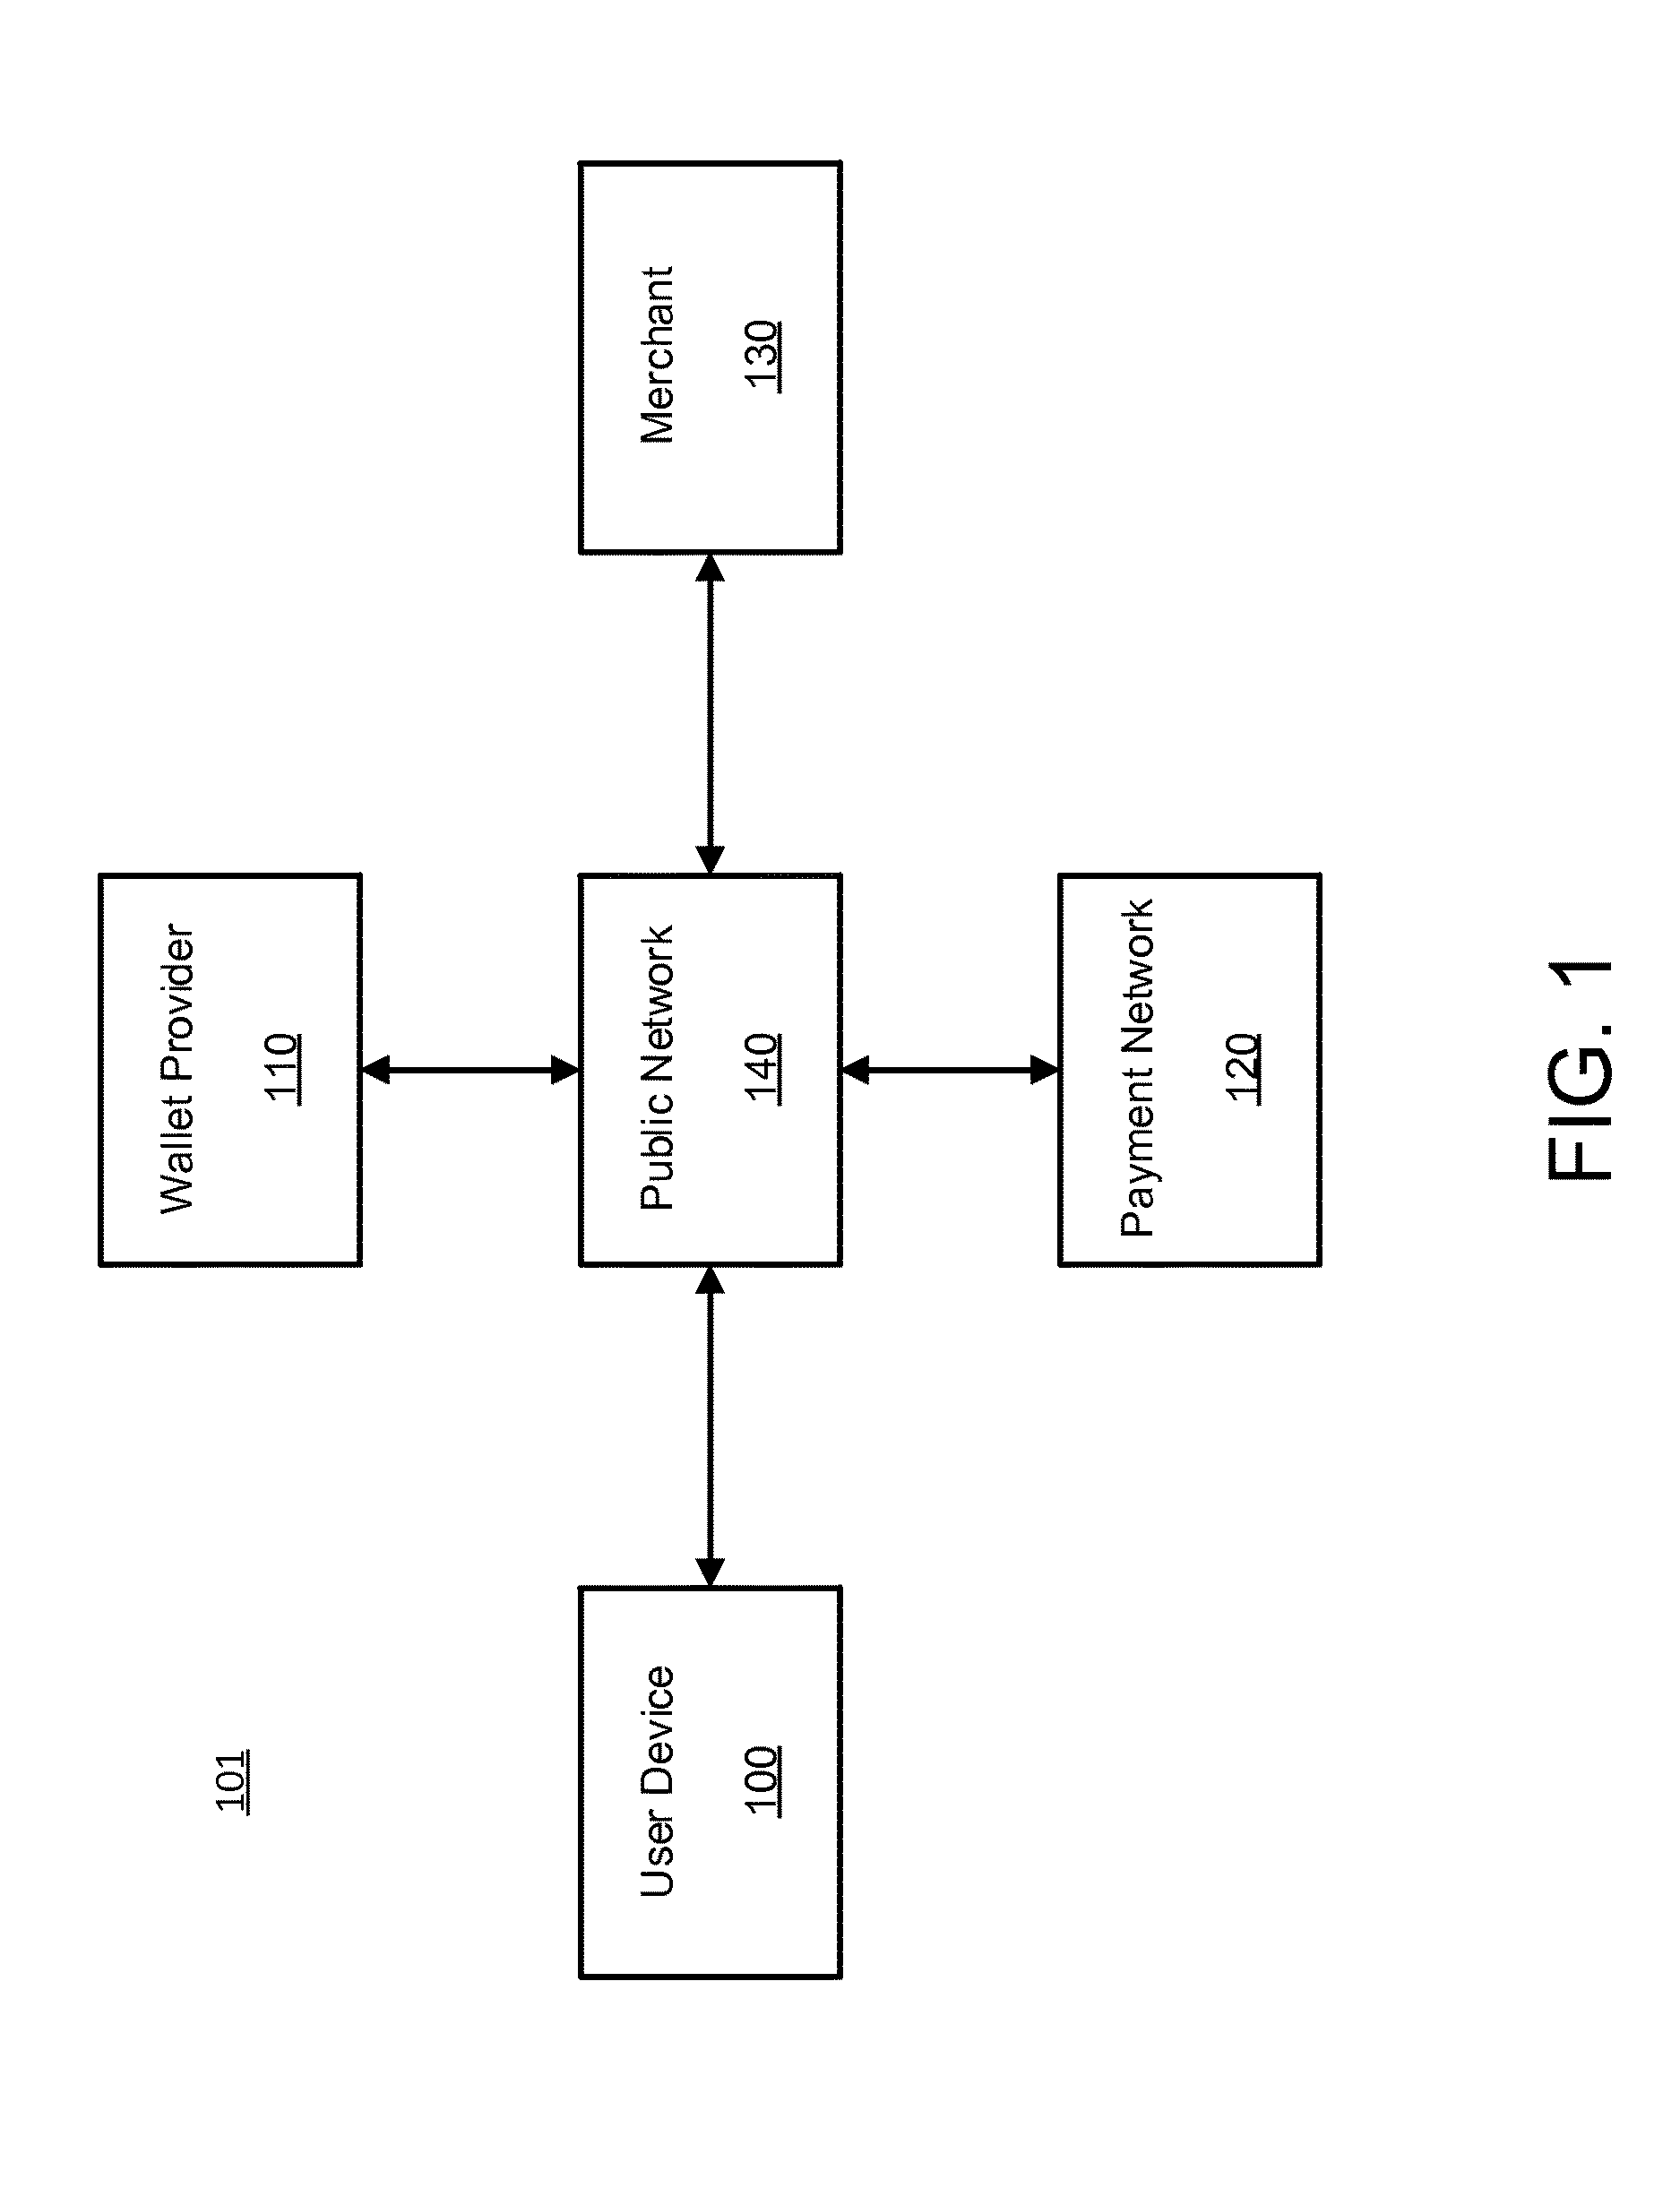 Systems and methods for in-application and in-browser purchases